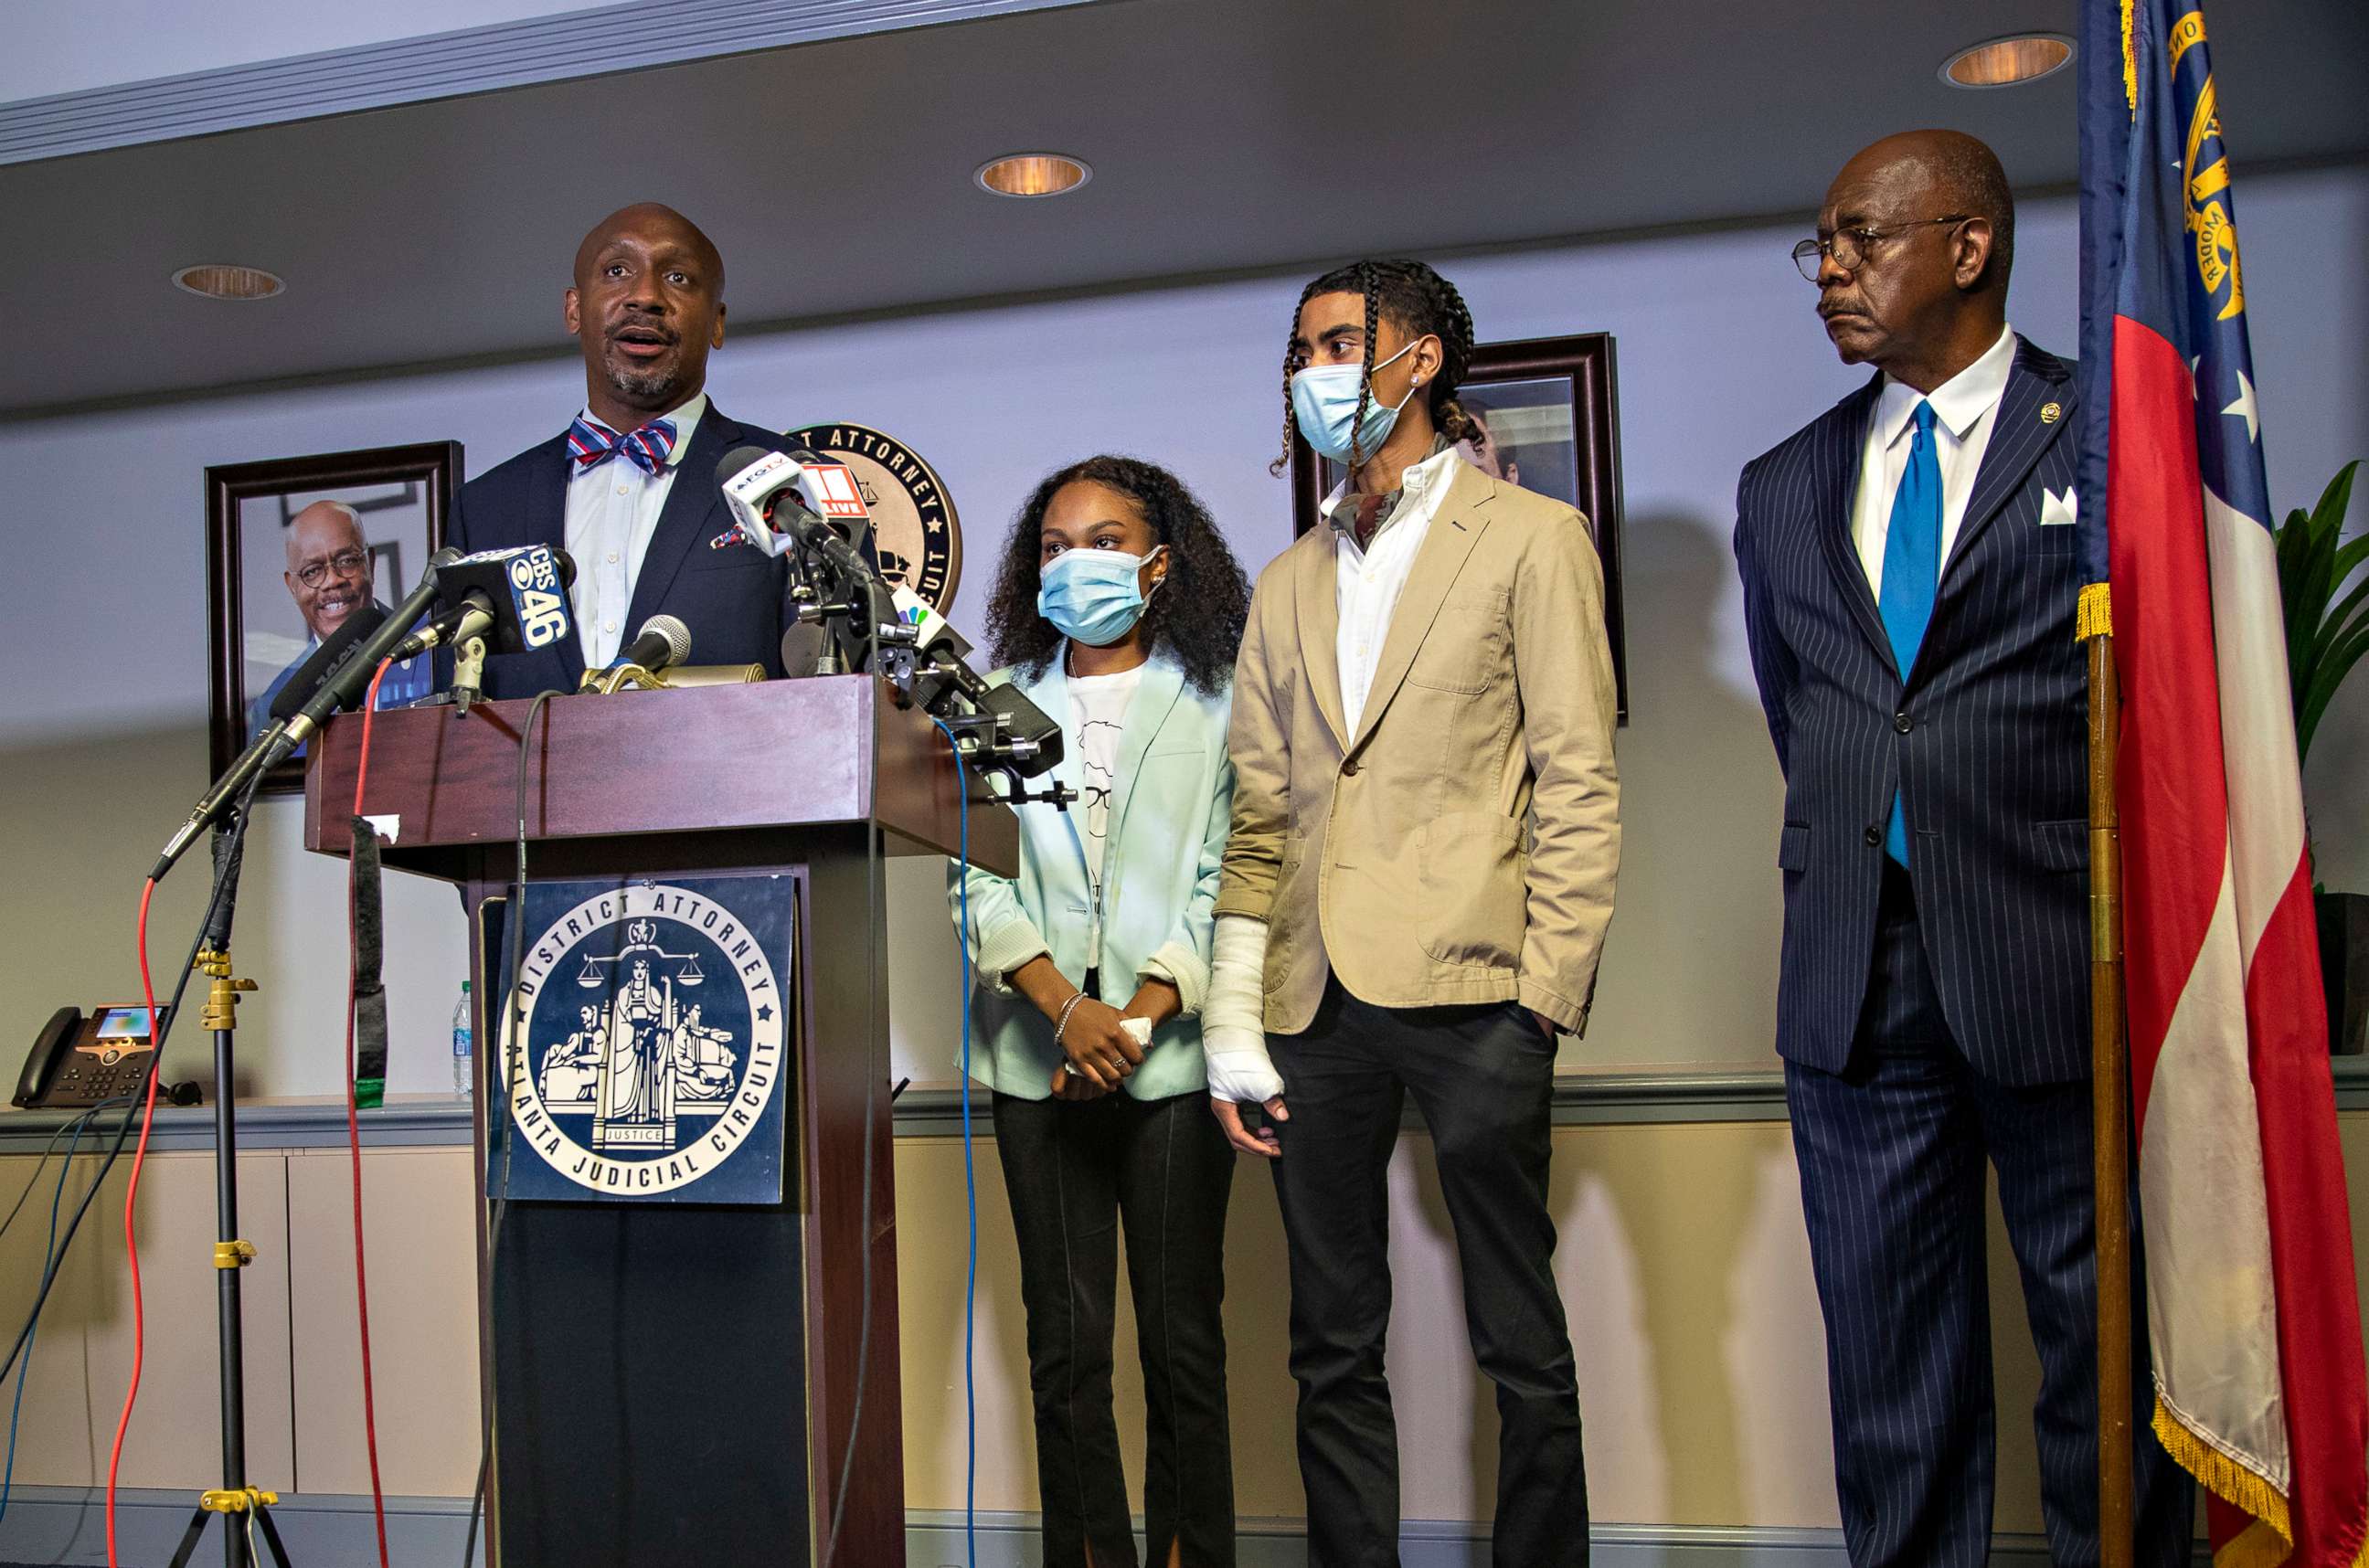 PHOTO: Attorney Mawuli Davis, left, speaks on behalf of Taniyah Pilgrim, center, and Messiah Young, right, during a press conference by the Fulton County District Attorney's Office in Atlanta, June 2, 2020.